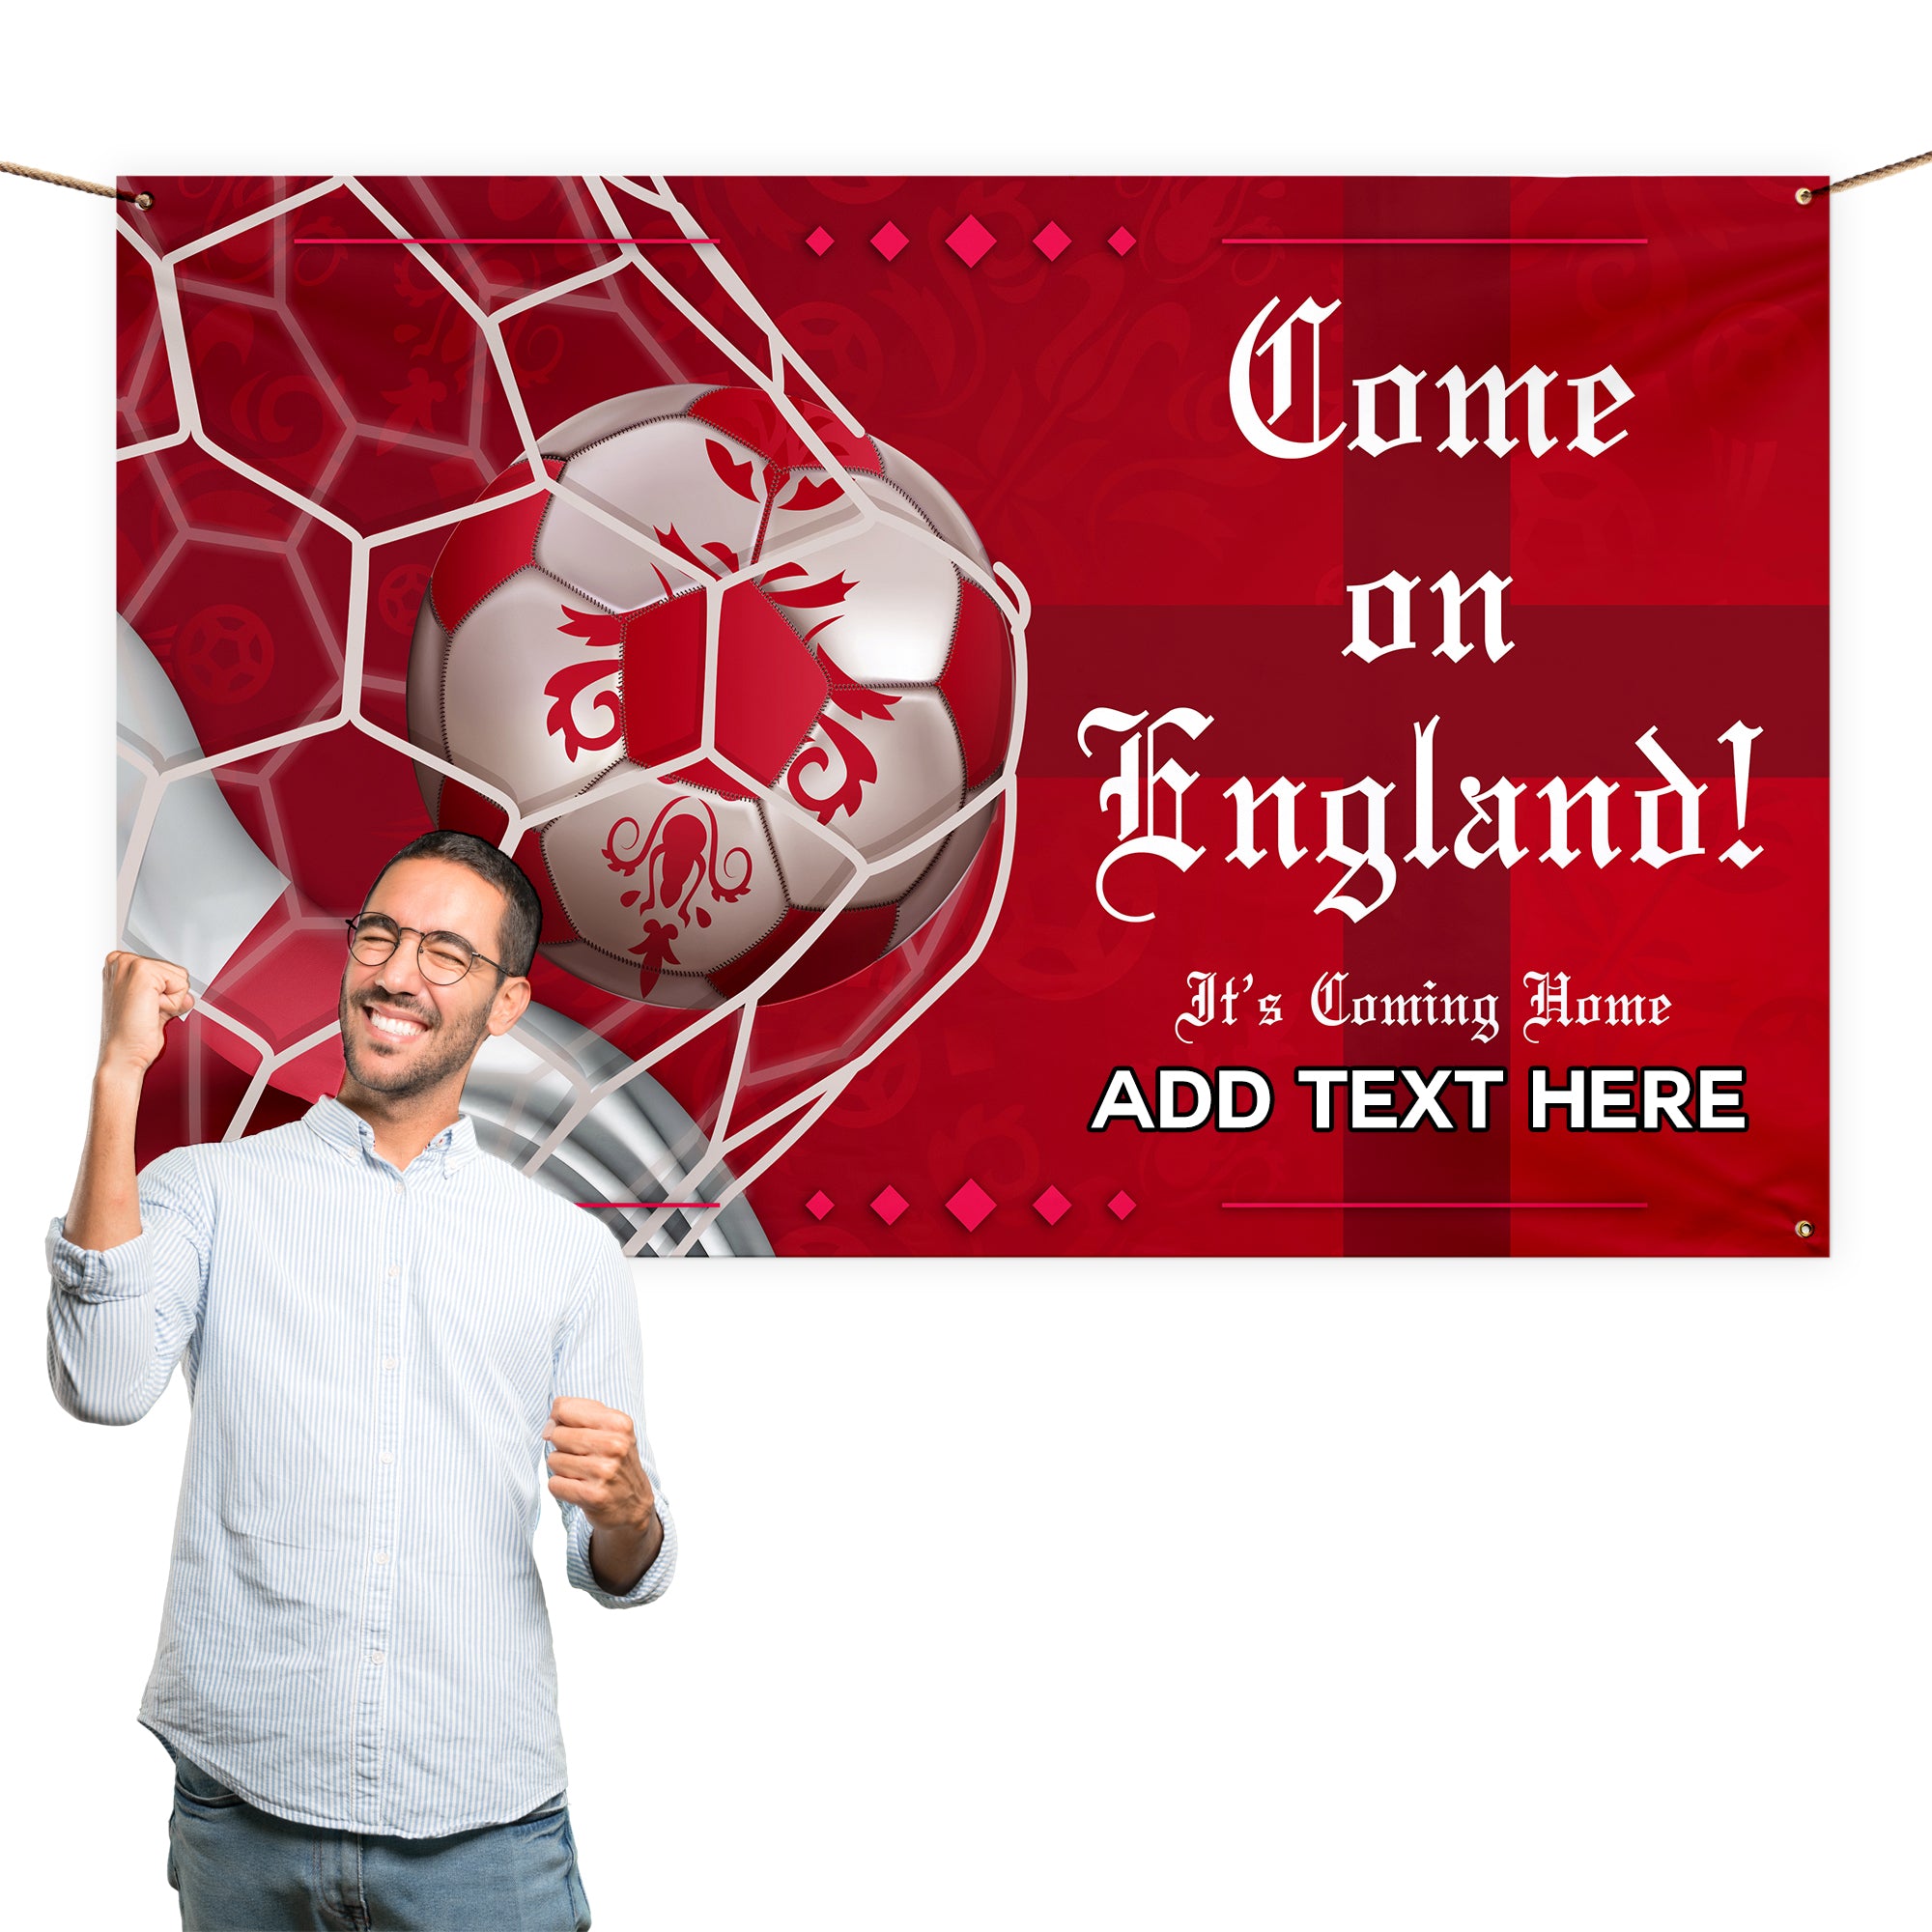 Back Of The Net - World Cup - Personalised 5ft x 3ft Fabric Banner